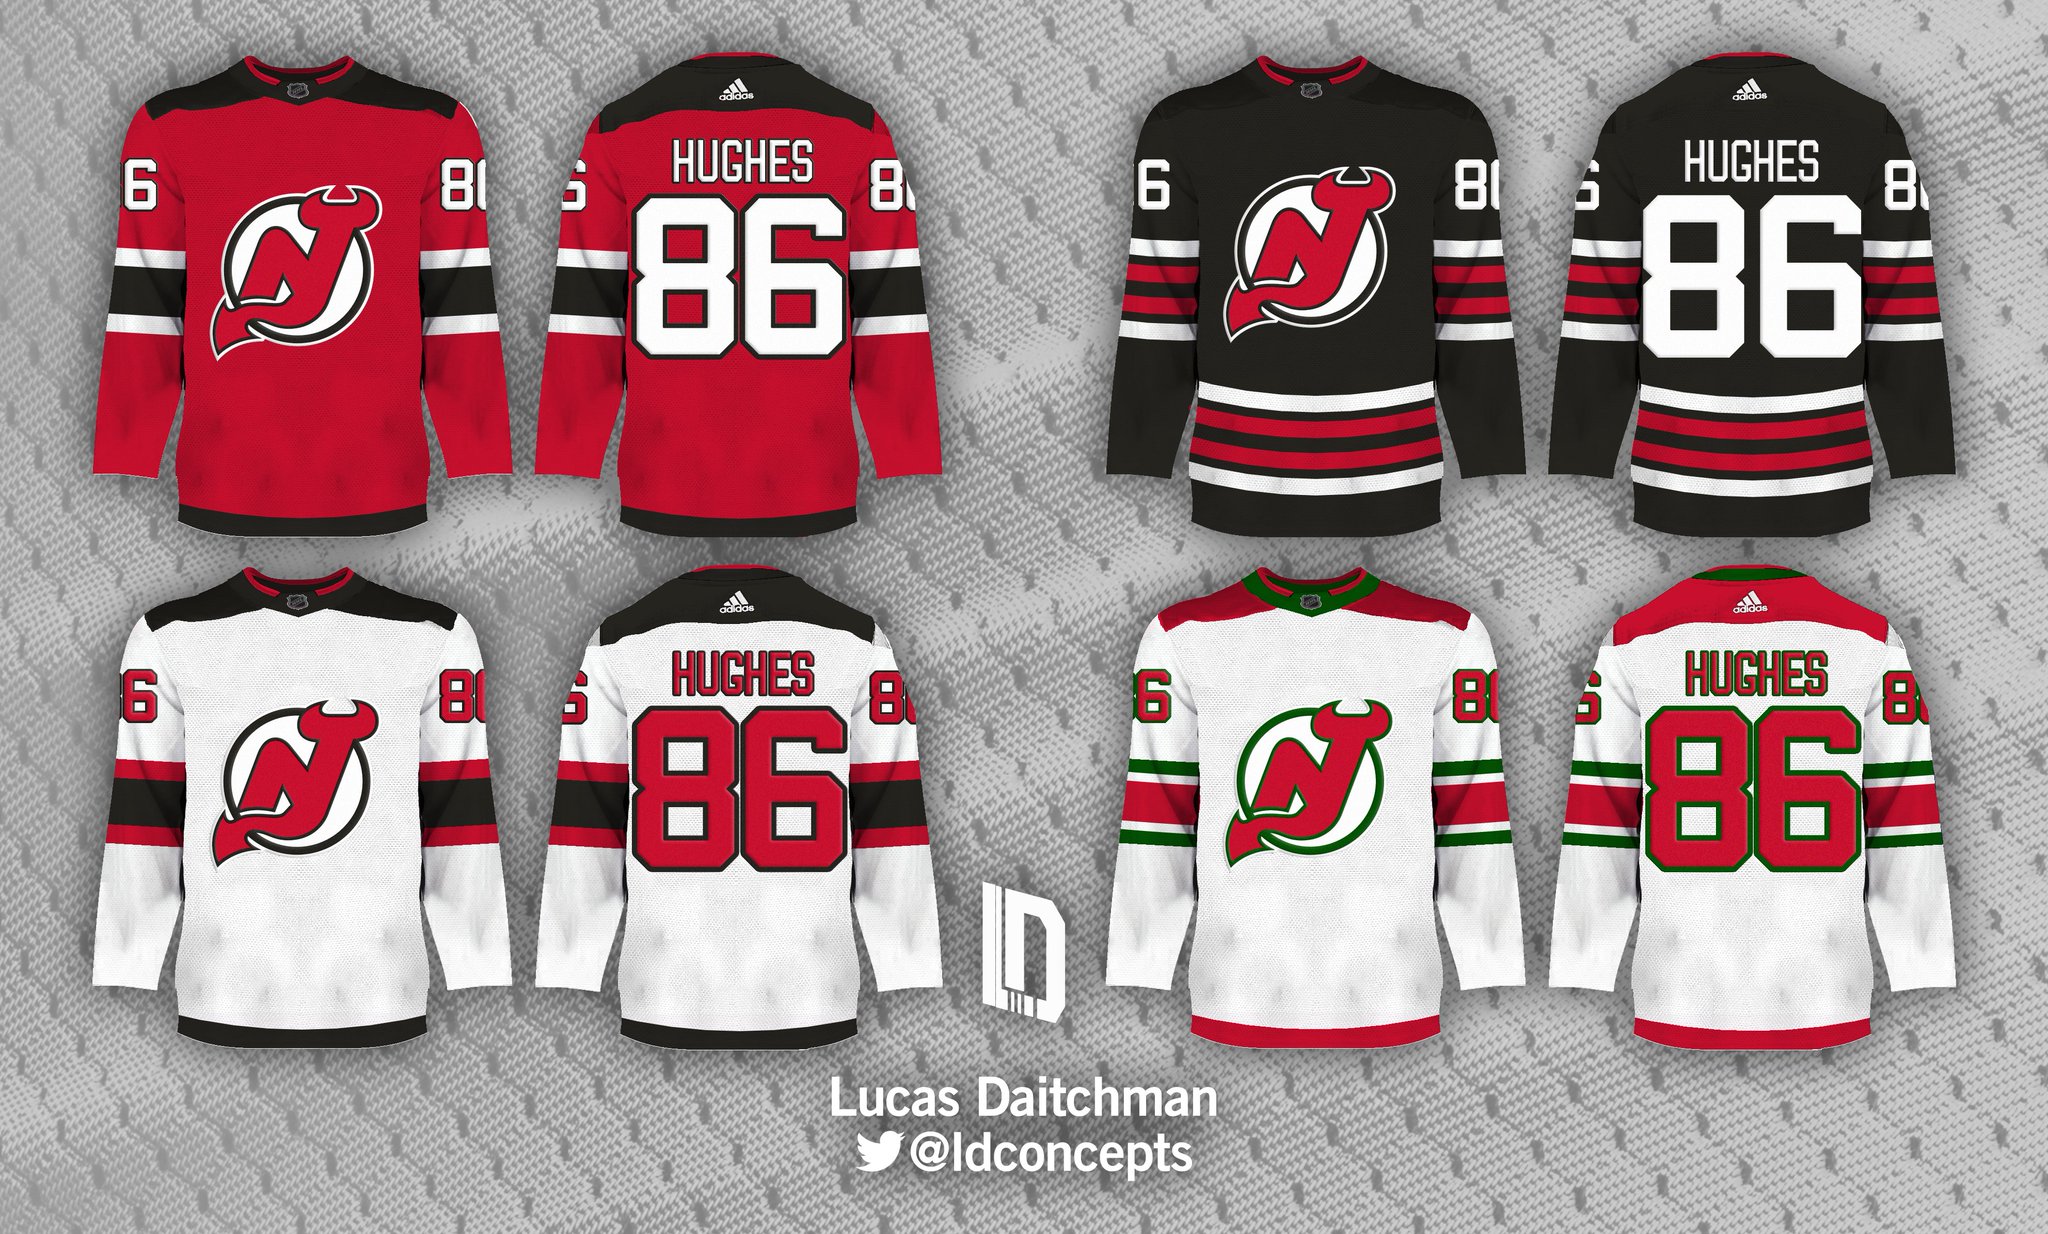 Lucas Daitchman on X: With the 2022 #StadiumSeries logo unveiled last  week, I put together a set of potential jerseys for the #Preds and  #GoBolts, bold like past editions with elements inspired